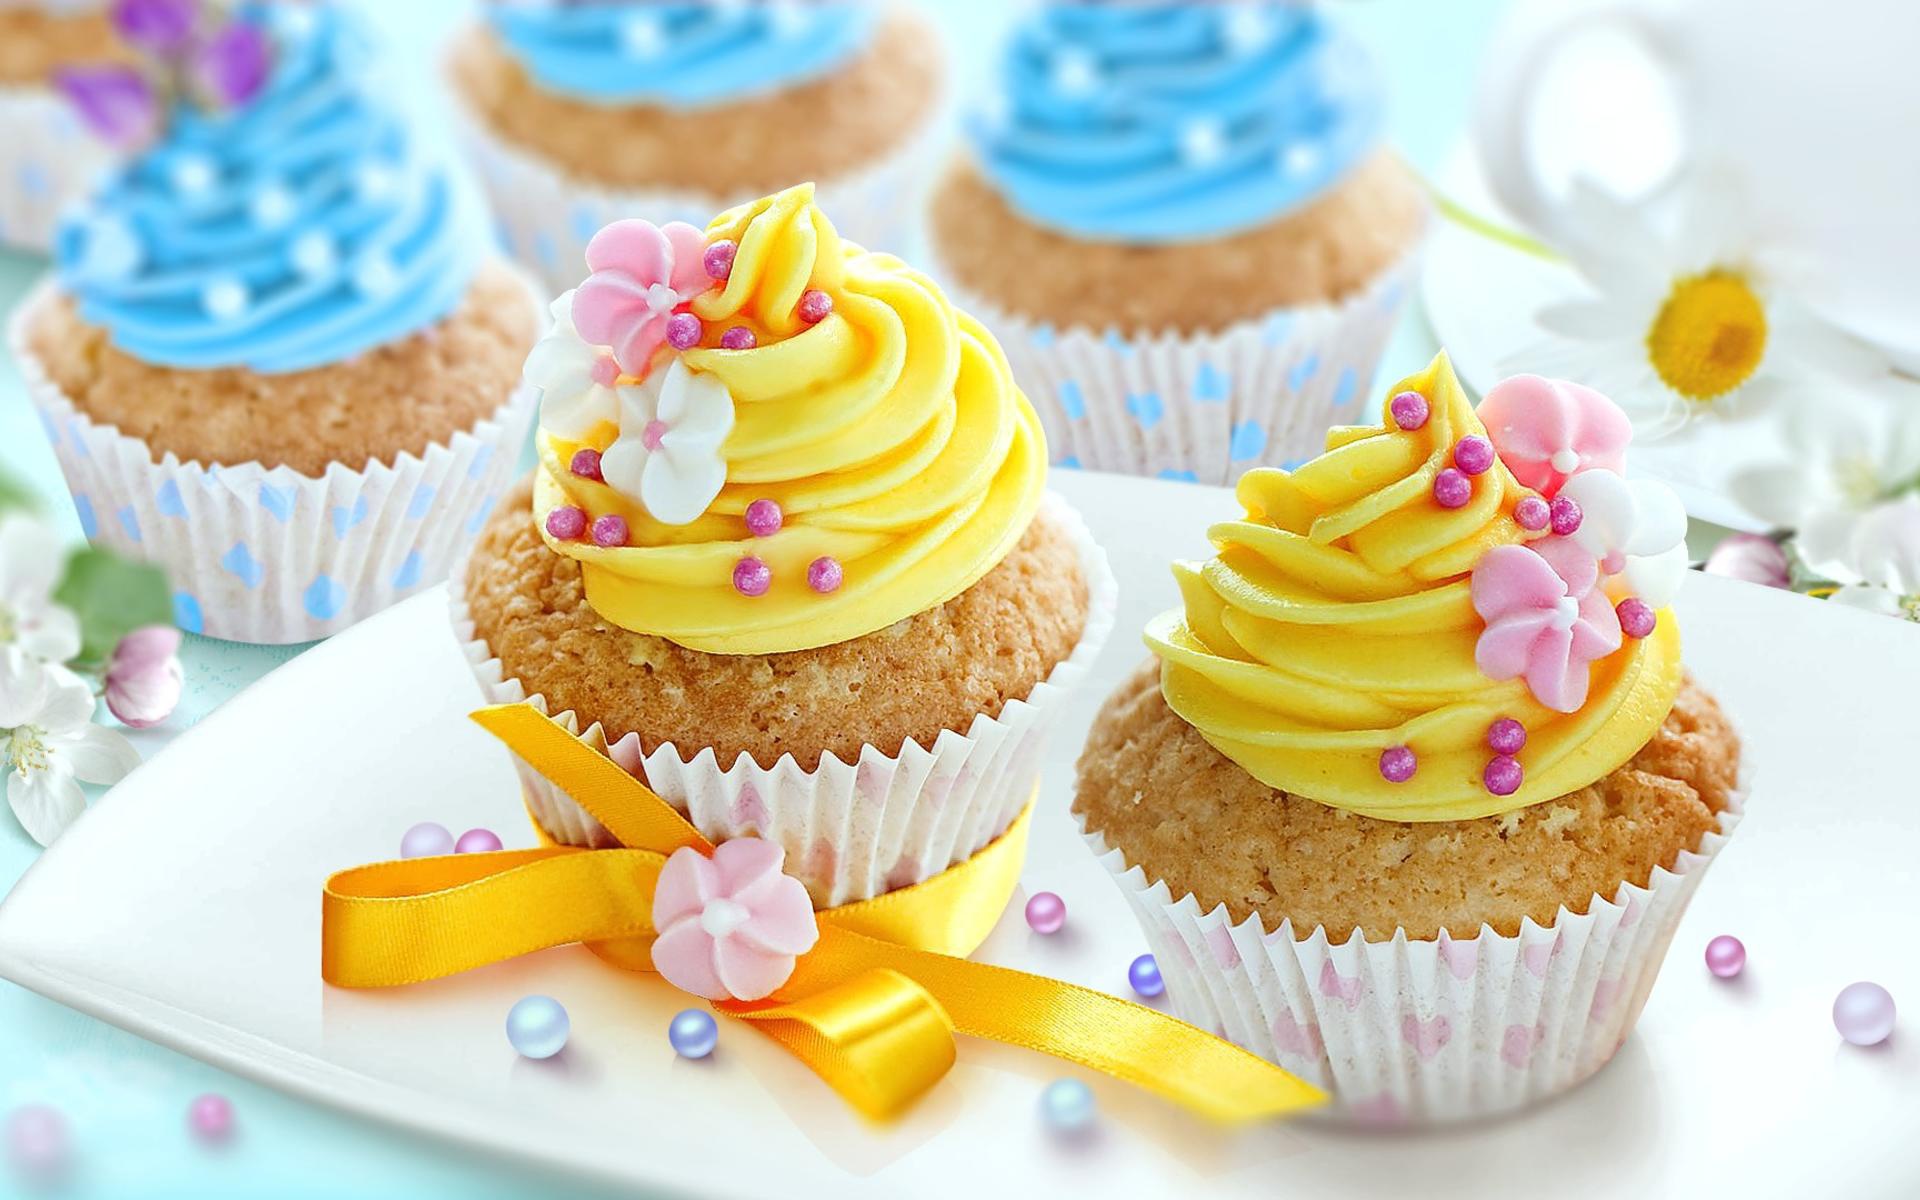 Wallpaper Of Cupcake, Sweets, Food Background & HD